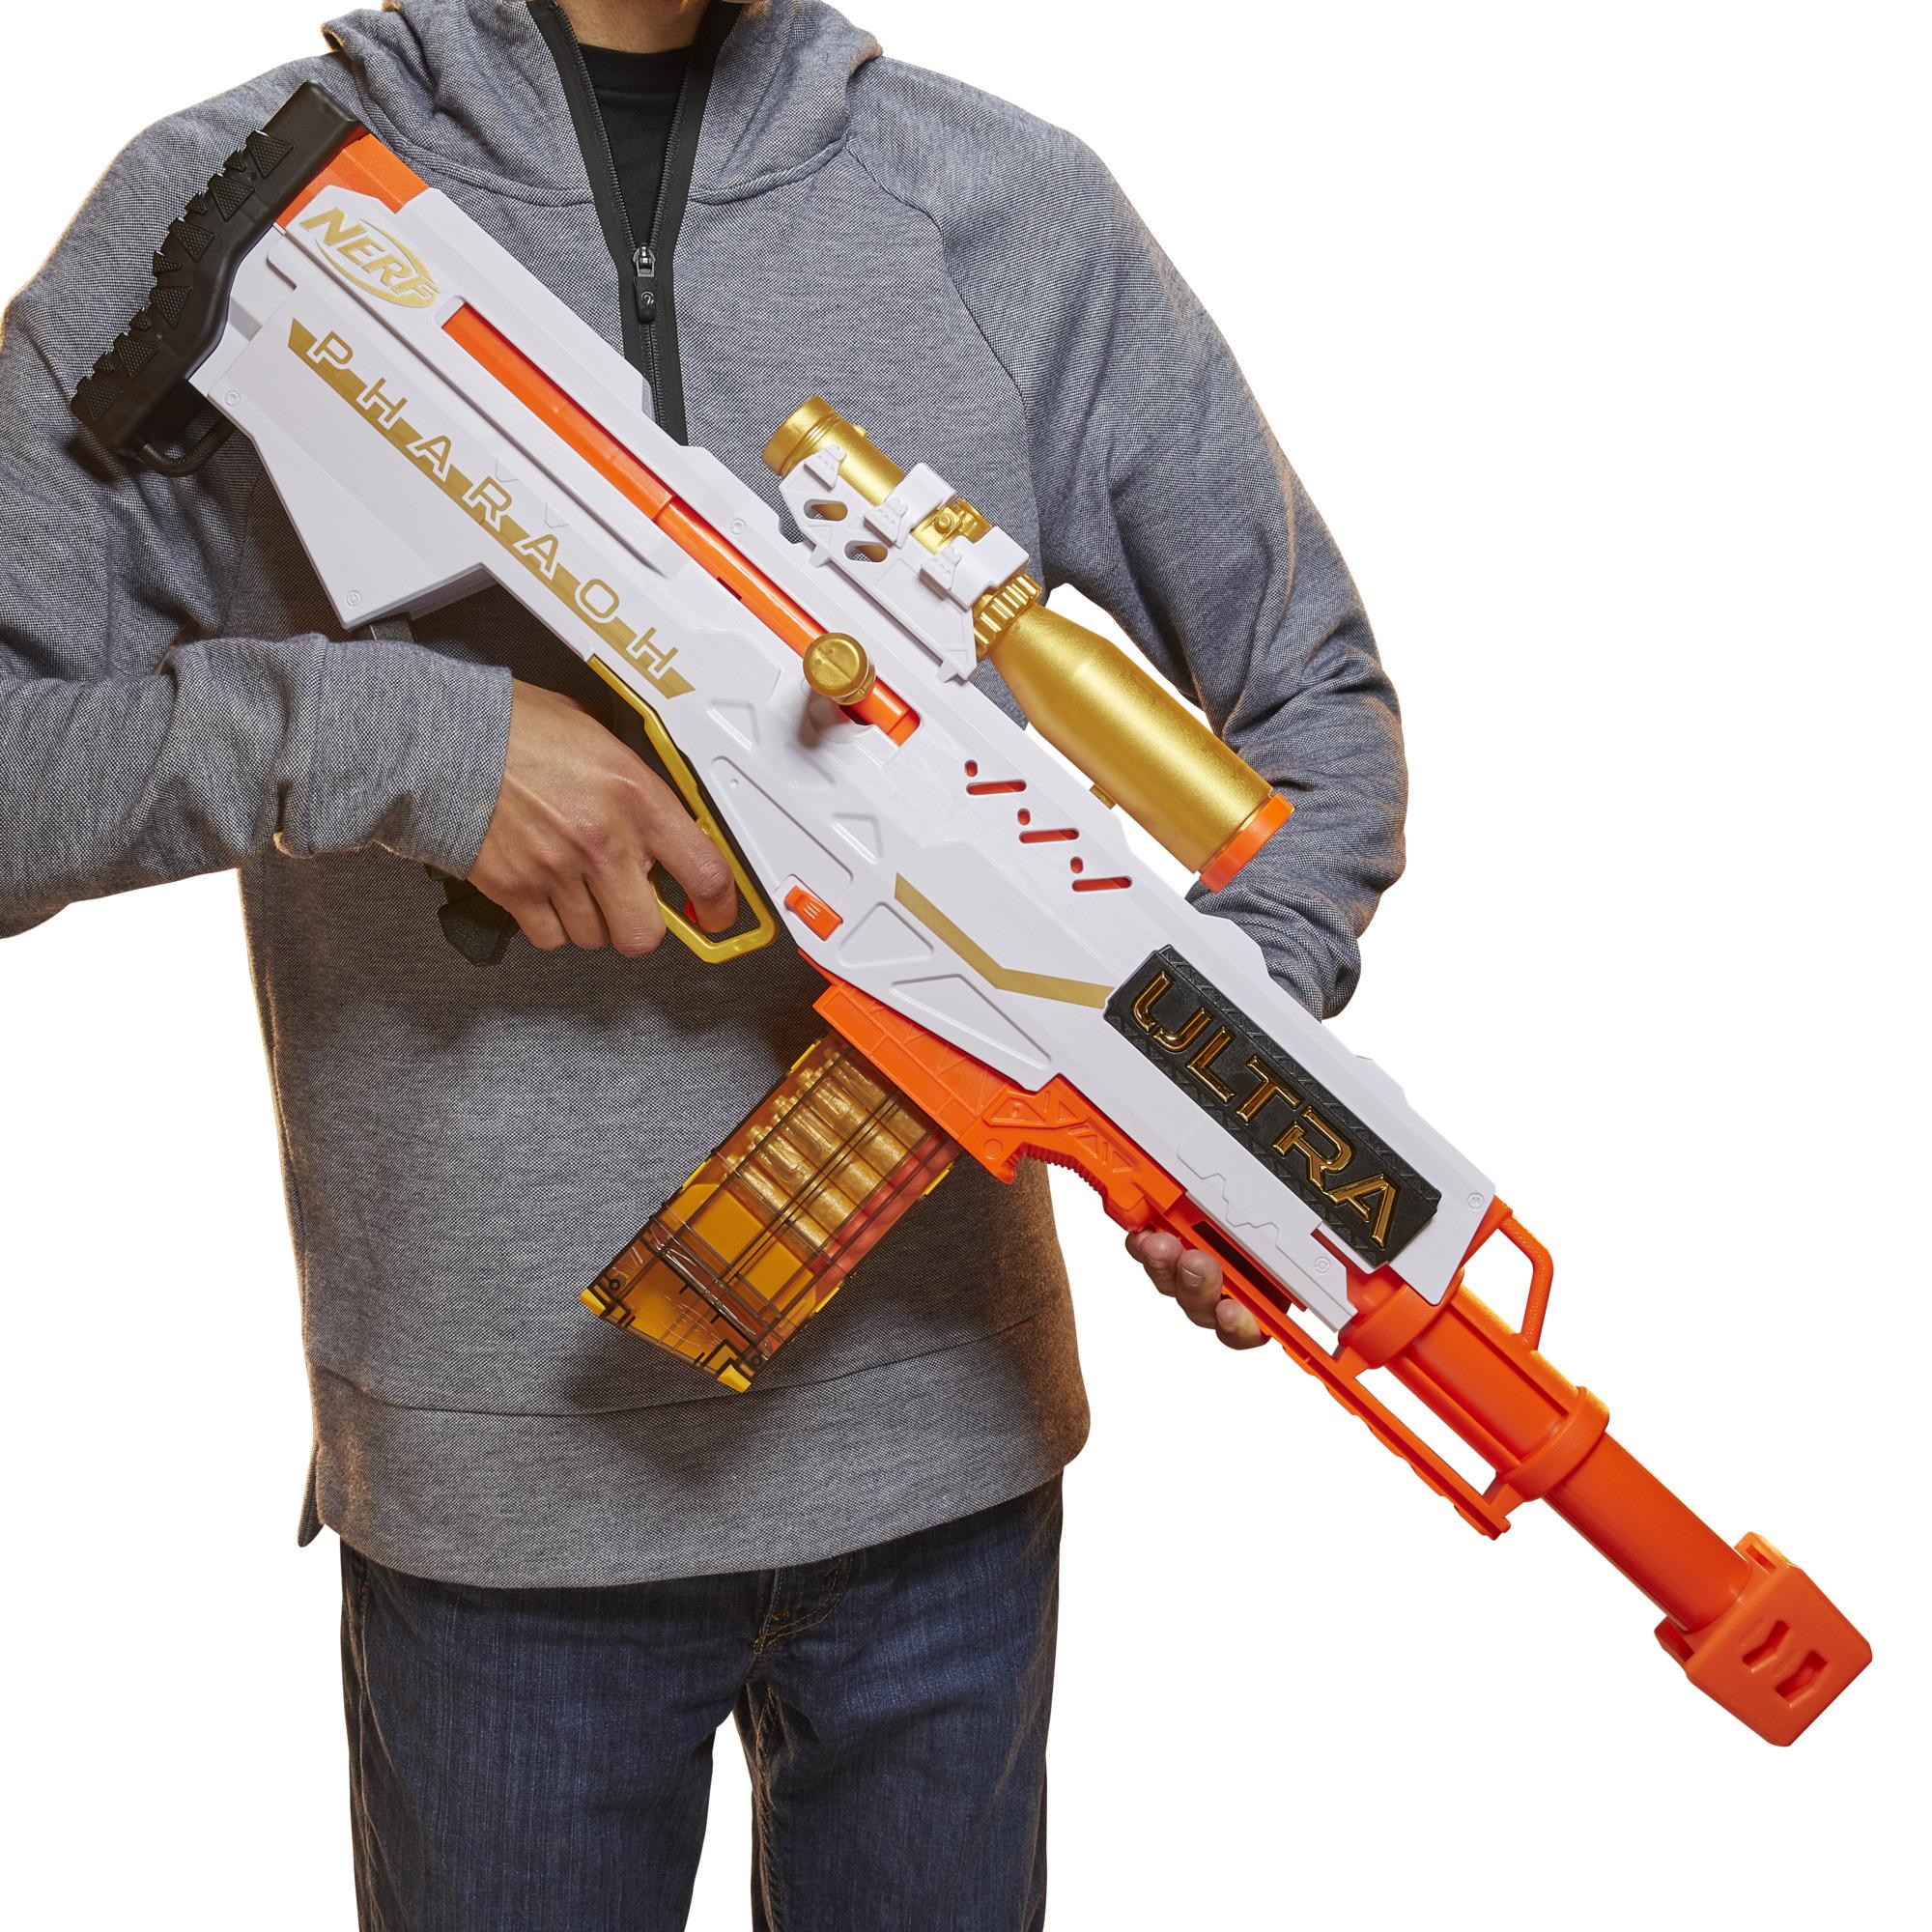 Nerf Ultra Pharaoh Blaster -- Gold Accents, 10-Dart Clip, 10 Nerf Ultra Darts, Compatible Only with Nerf Ultra Darts